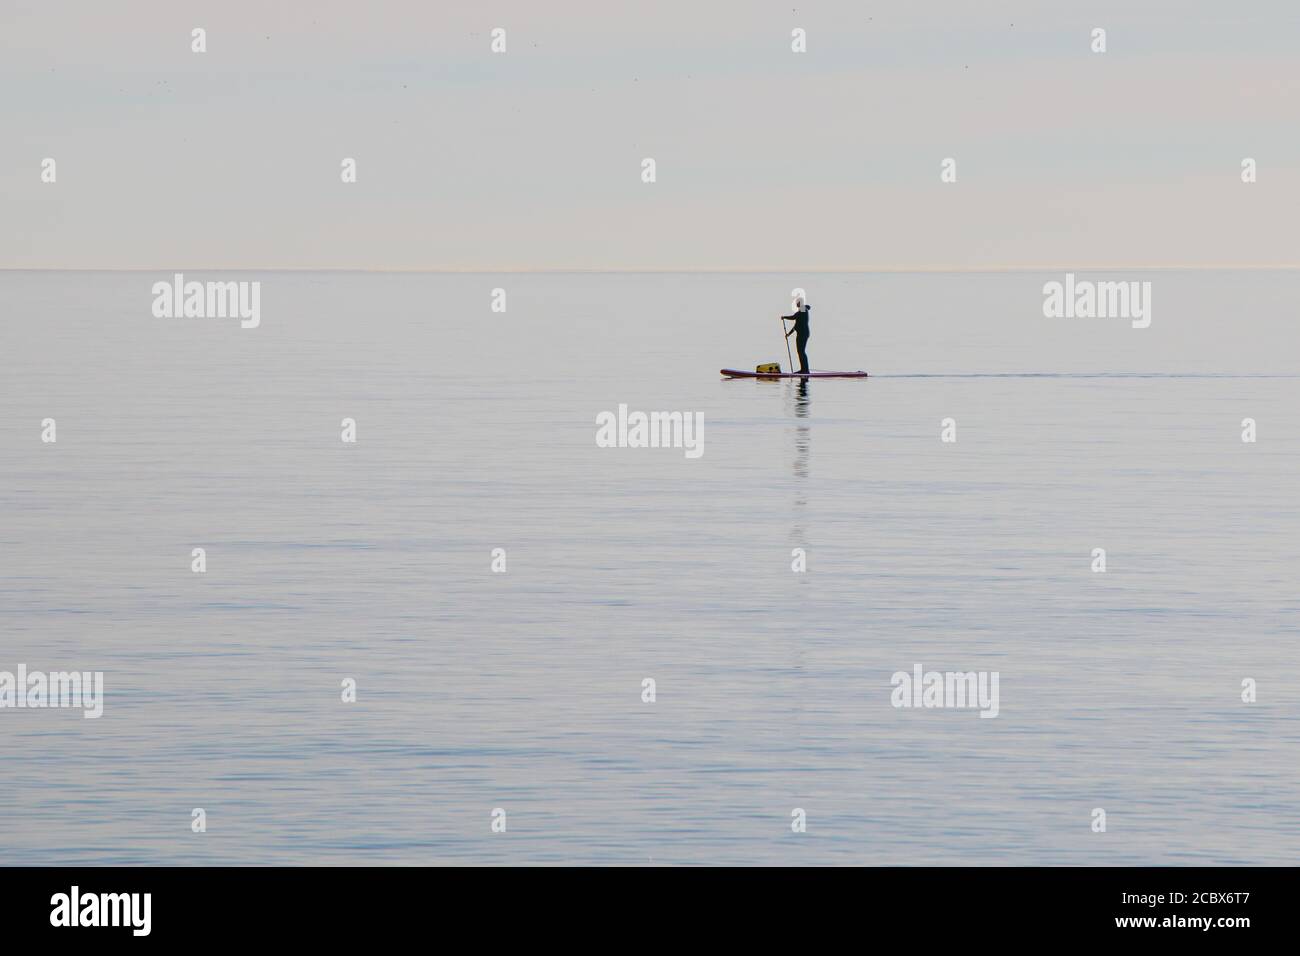 A lone man with a bag moving across the sea on a surfboard with an oar. Stock Photo